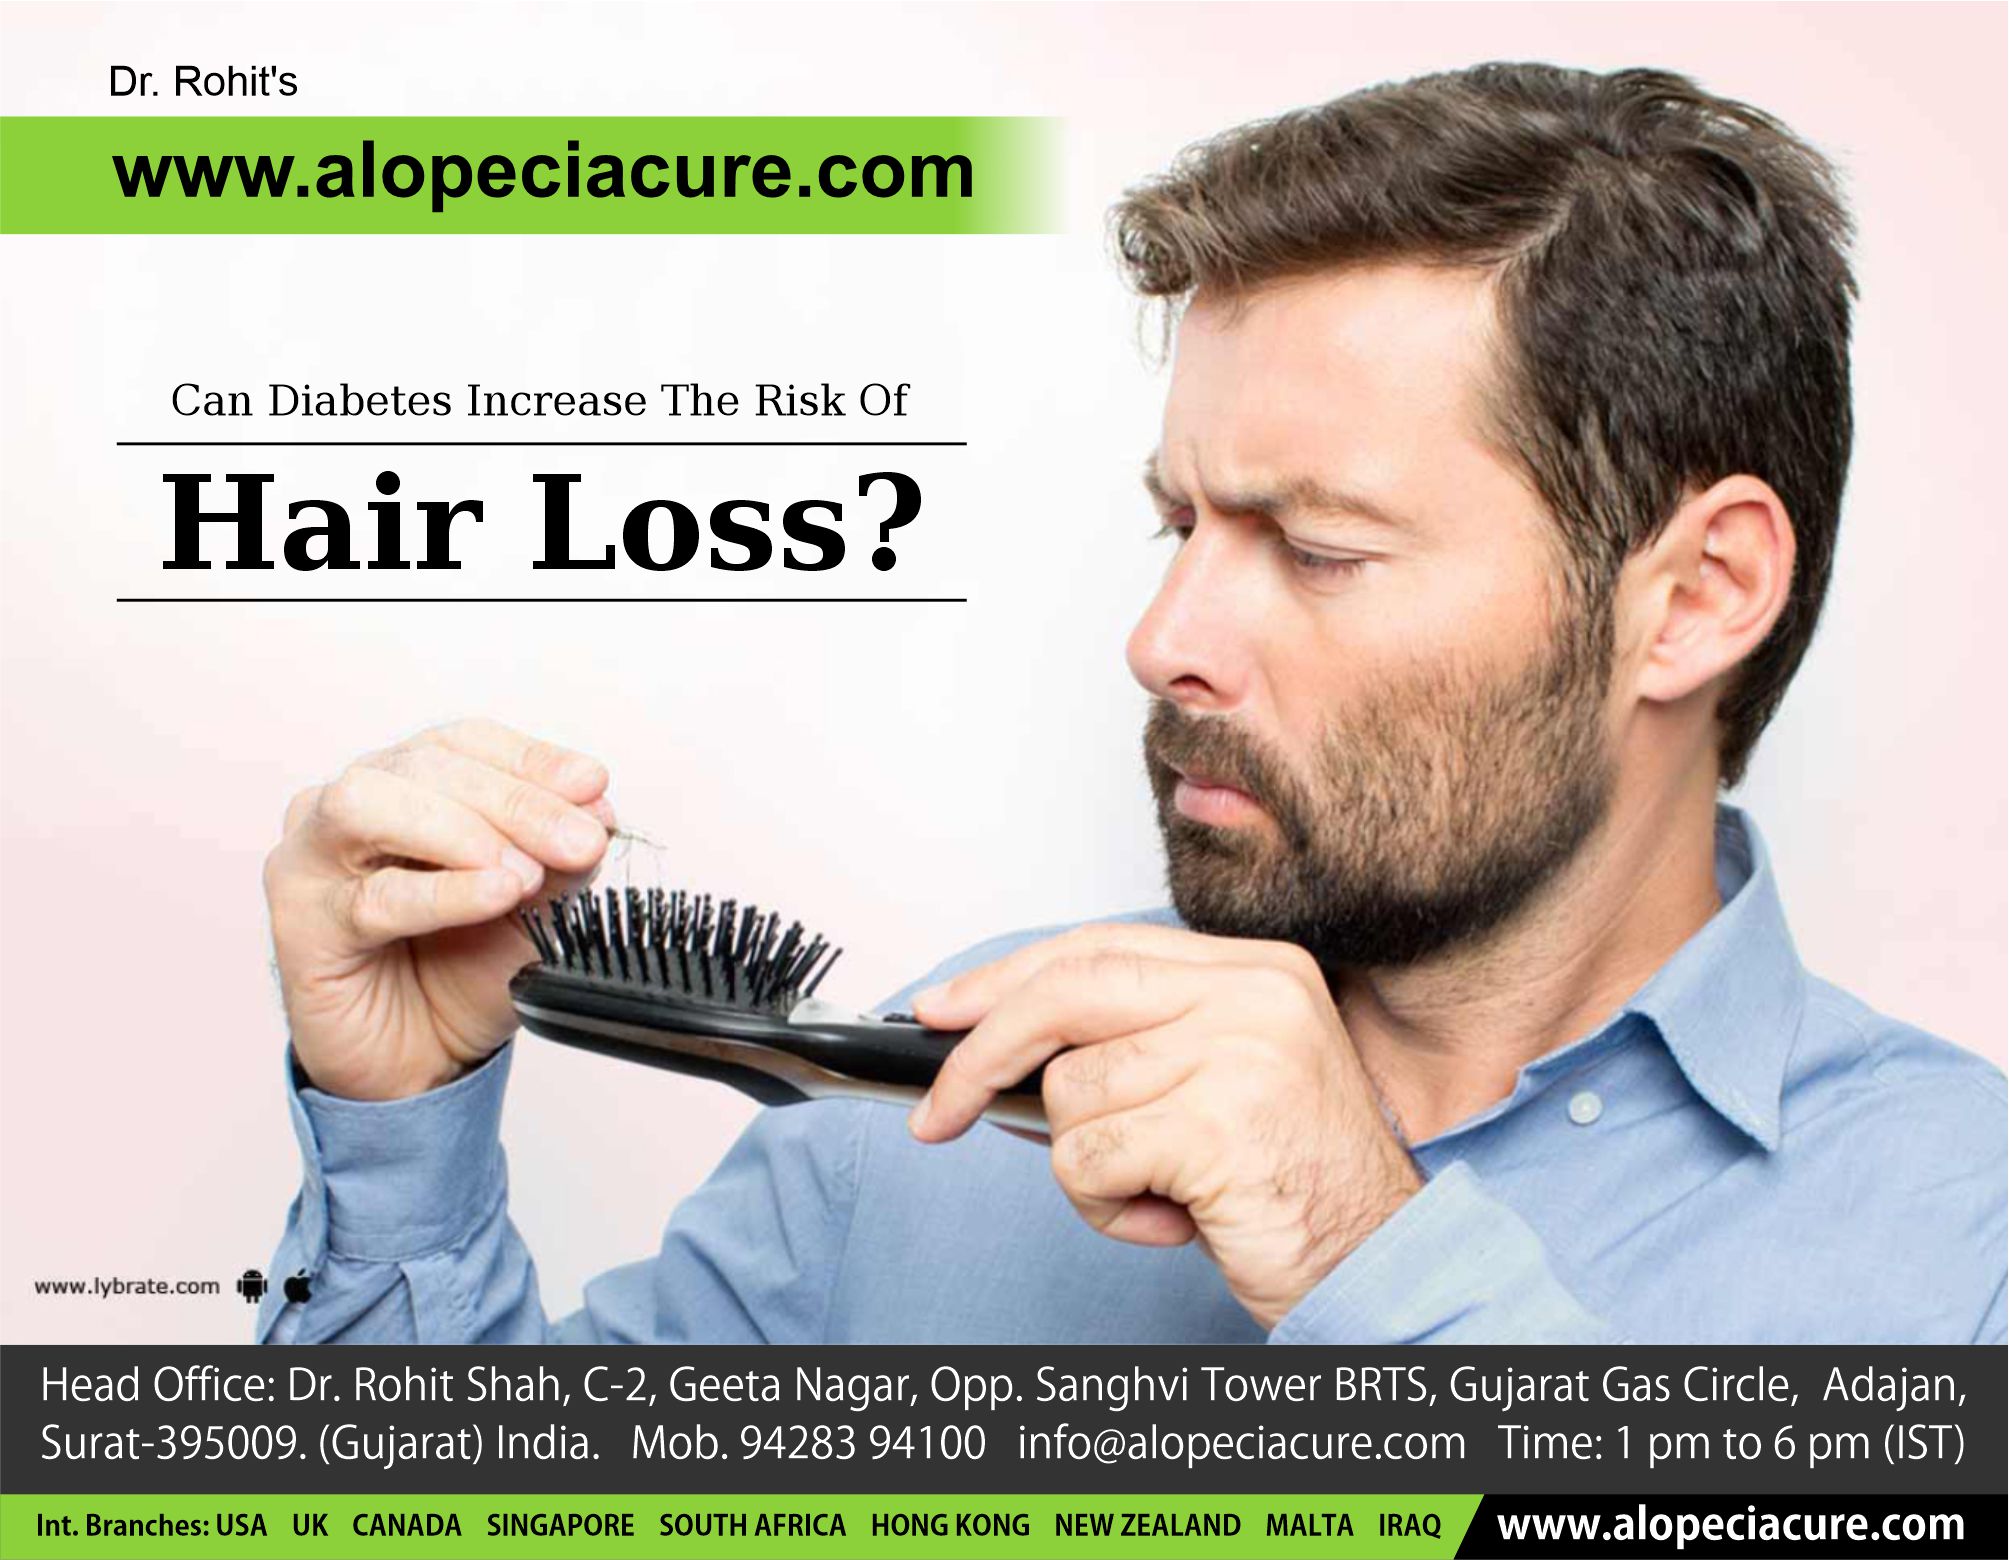 Can Diabetes Increase The Risk Of Hair Loss?